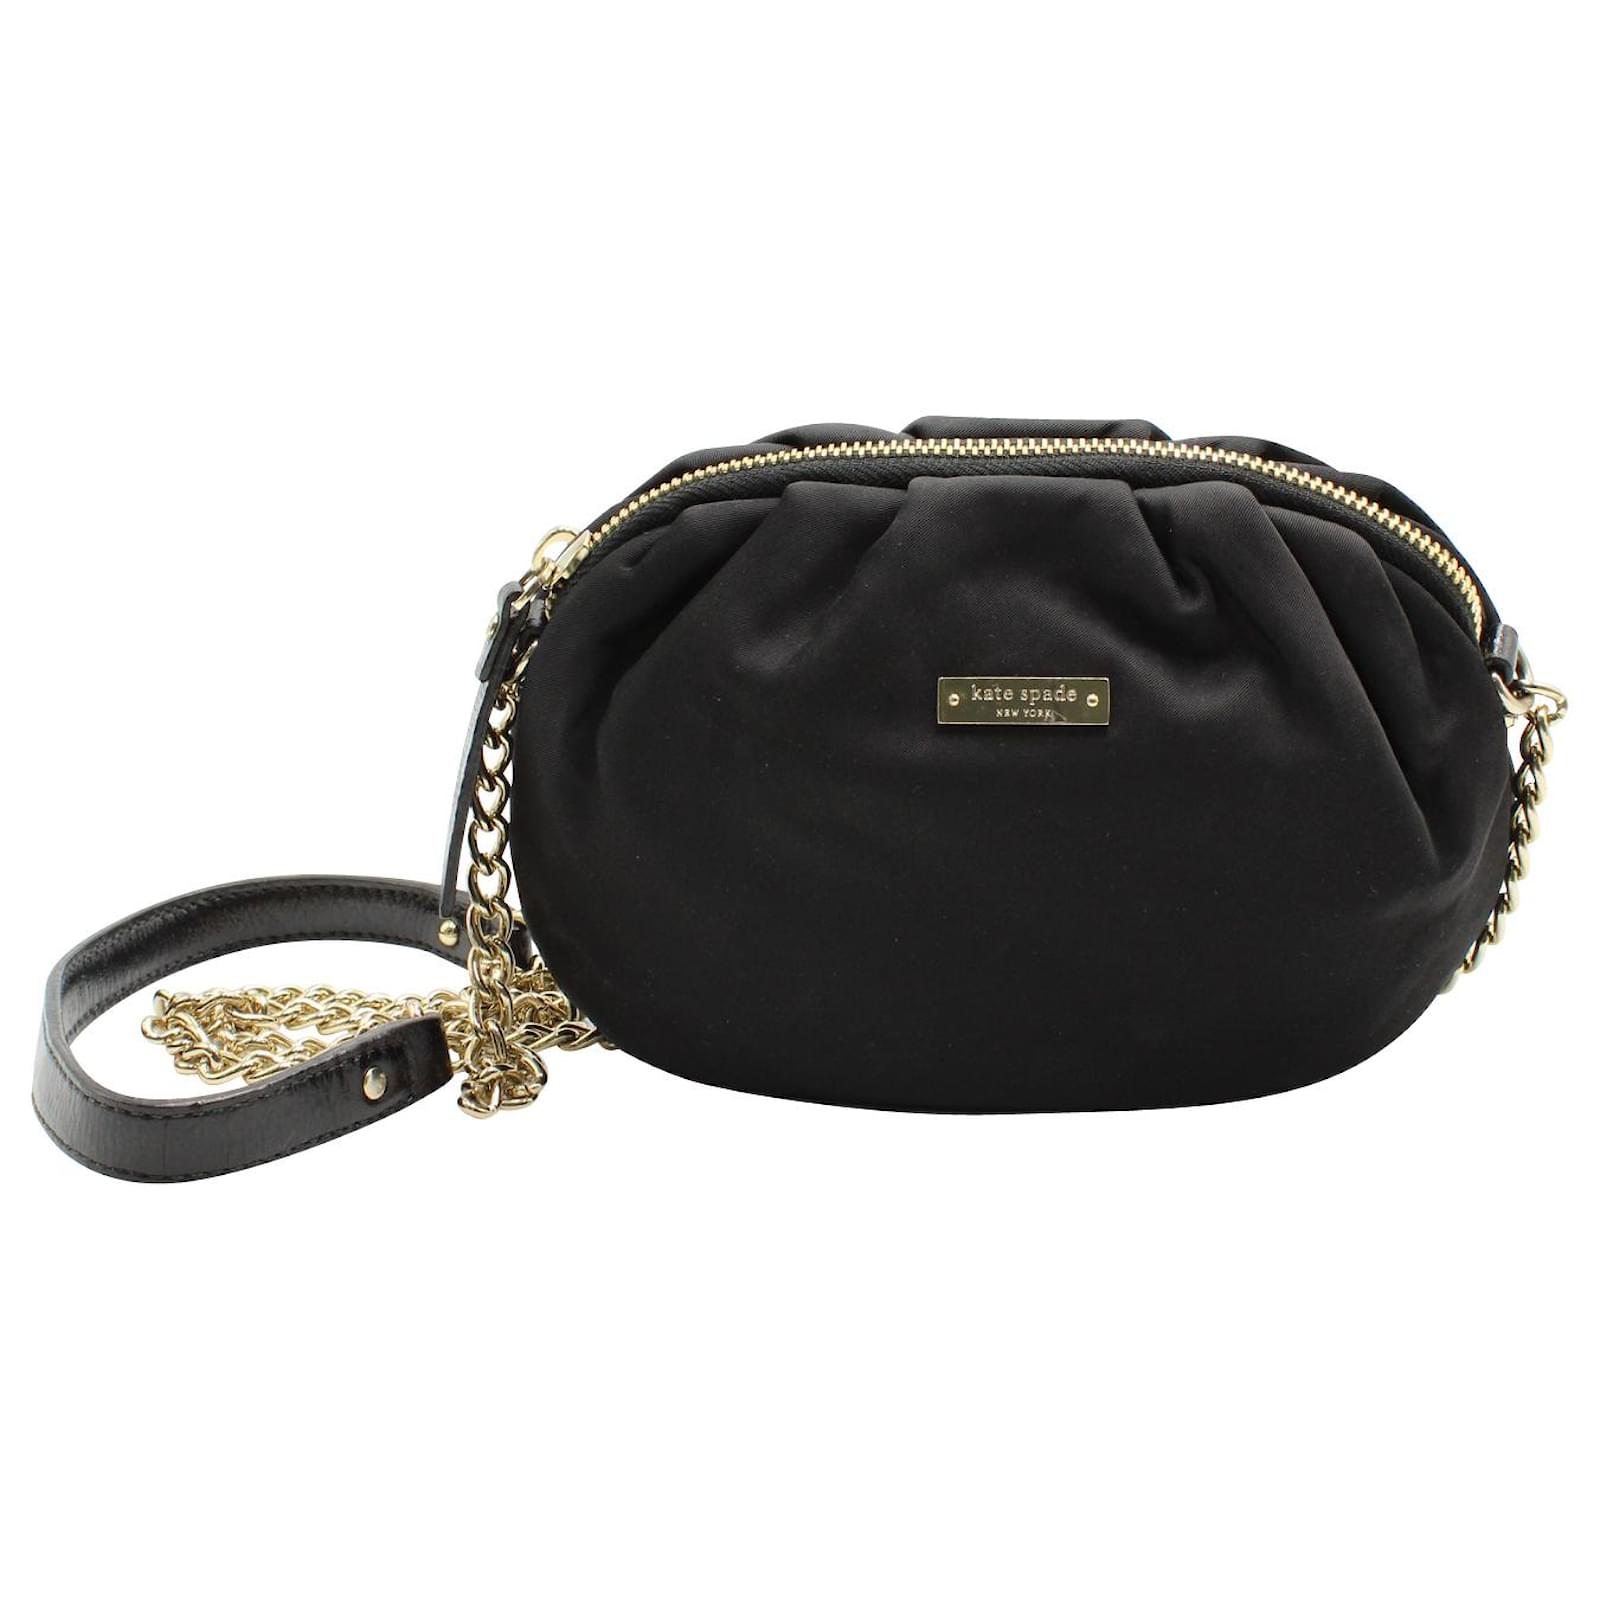 Kate Spade Black Bag with Gold Chain